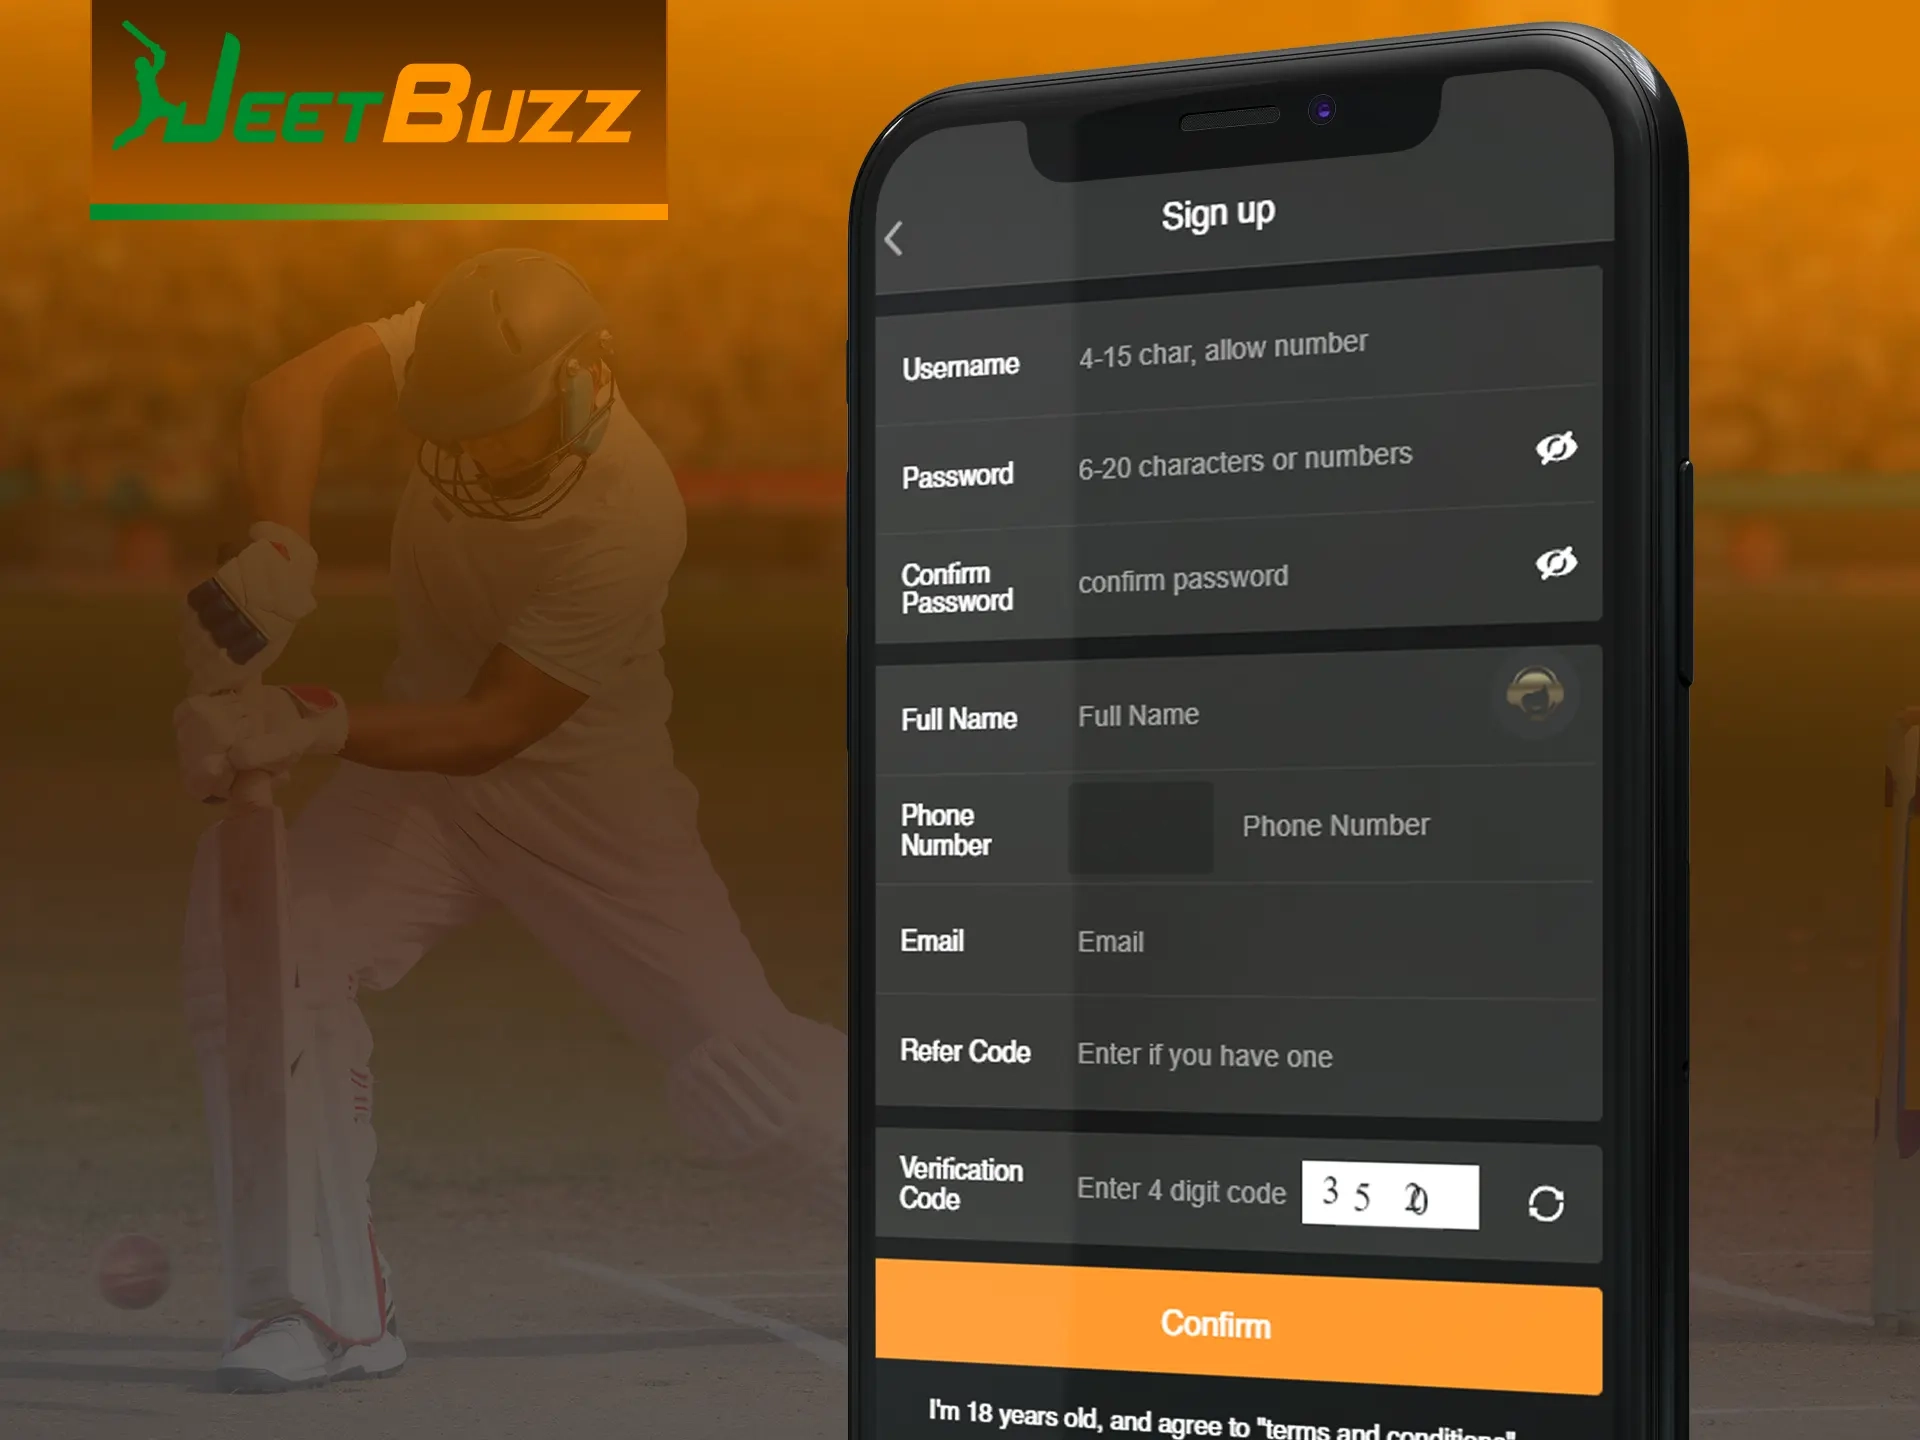 Complete a simple registration in the Jeetbuzz app.